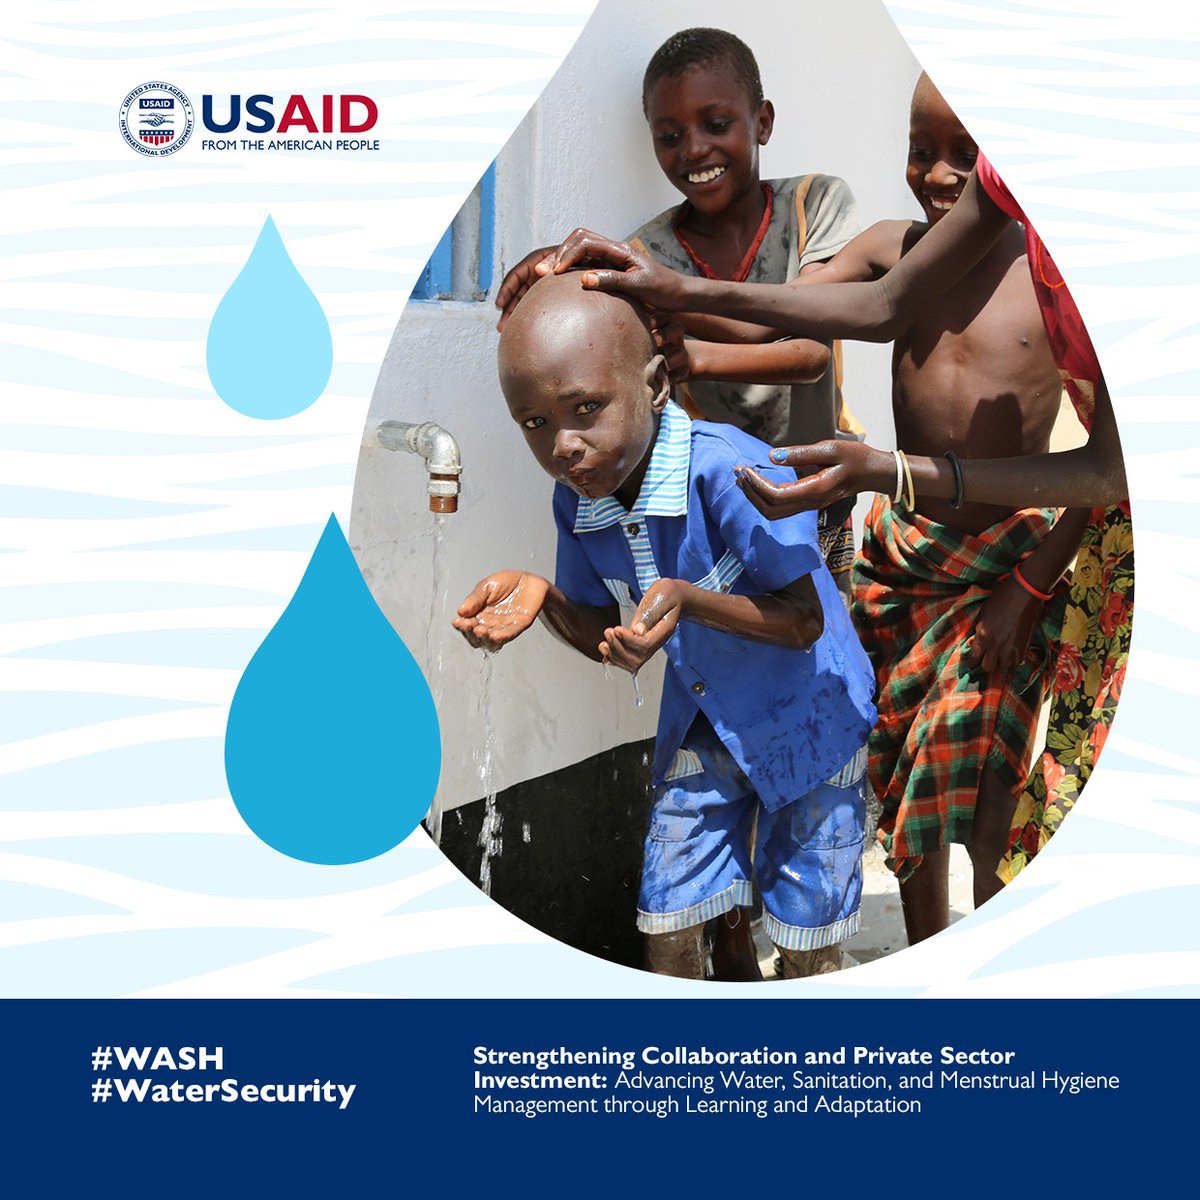 USAID's WASH program in Kenya is working tirelessly to ensure access to clean water, sanitation, and hygiene in rural areas, enhancing water security for vulnerable communities. #WASH #WaterSecurity